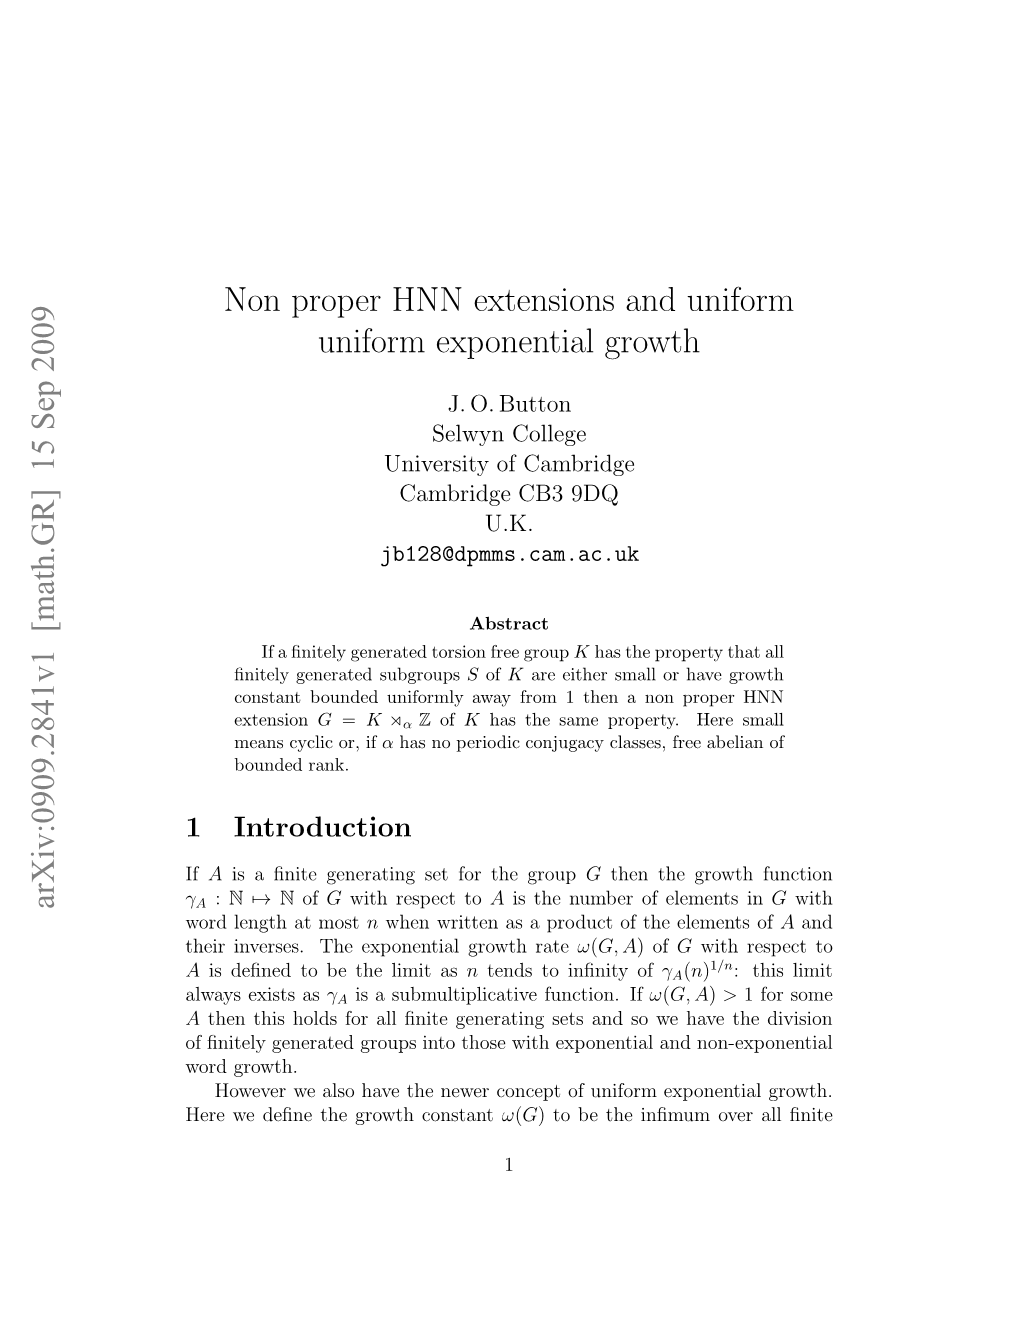 Non Proper HNN Extensions and Uniform Uniform Exponential Growth